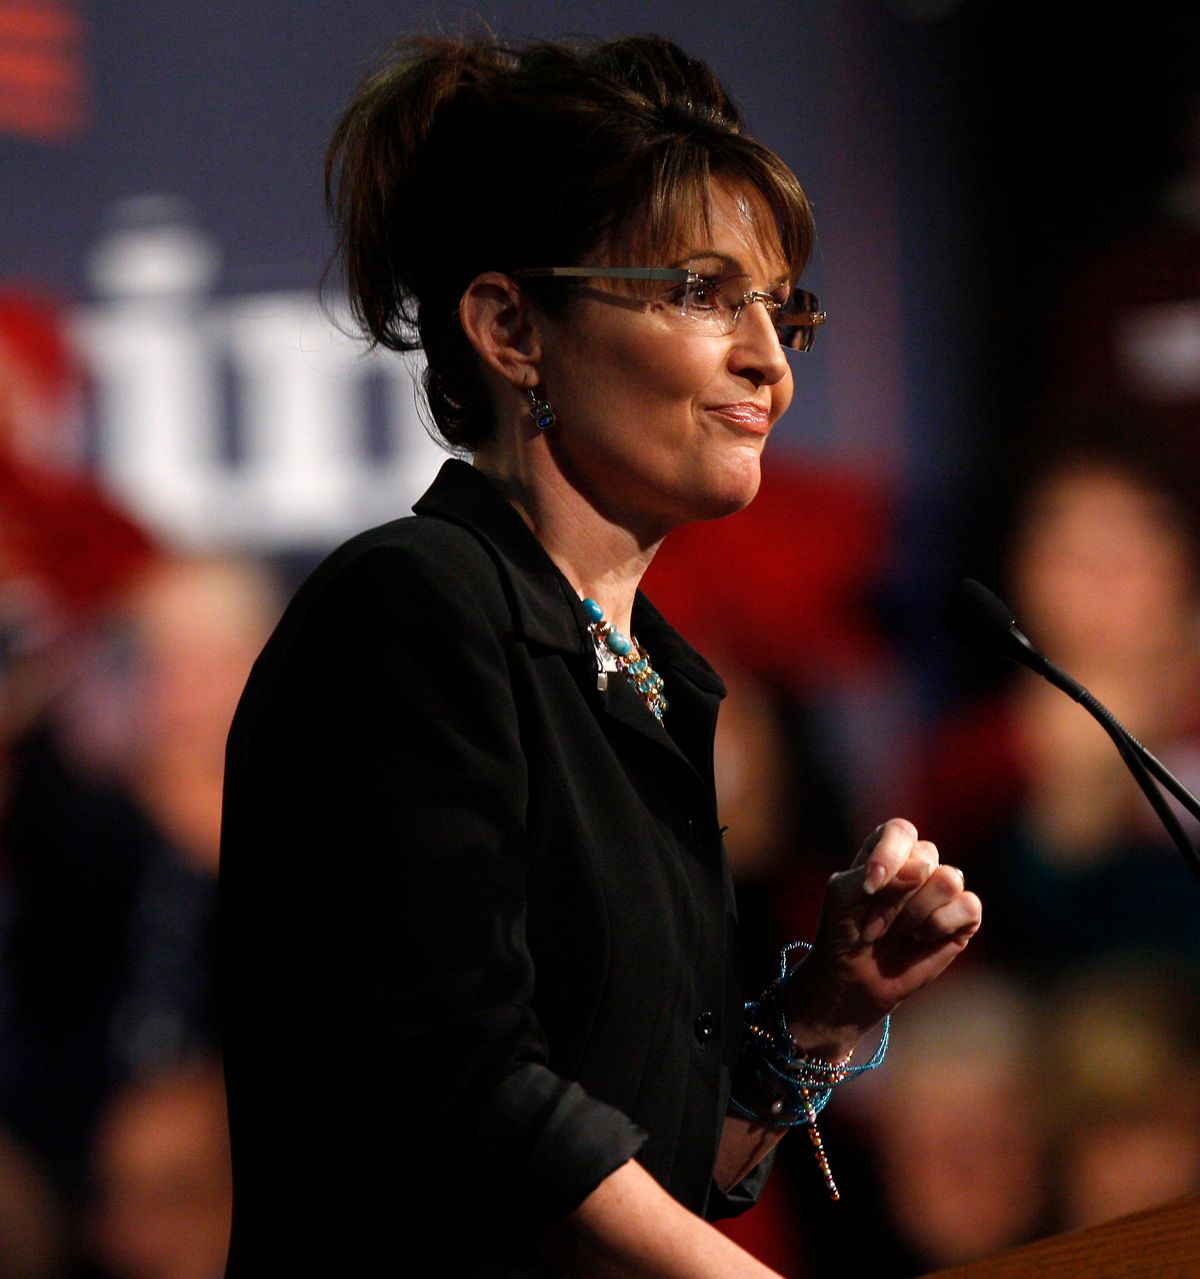 Former Alaska Governor and vice presidential candidate Sarah Palin speaks during a campaign rally for U.S. Senator John McCain (R-AZ) at Dobson High School in Mesa, Arizona March 27, 2010. McCain who is seeking a fifth term as U.S. Senator received Palin's endorsement yesterday and will challenge JD Hayworth during the Republican primary in August 2010. REUTERS/Joshua Lott (UNITED STATES - Tags: POLITICS)   (Â© Joshua Lott / Reuters)